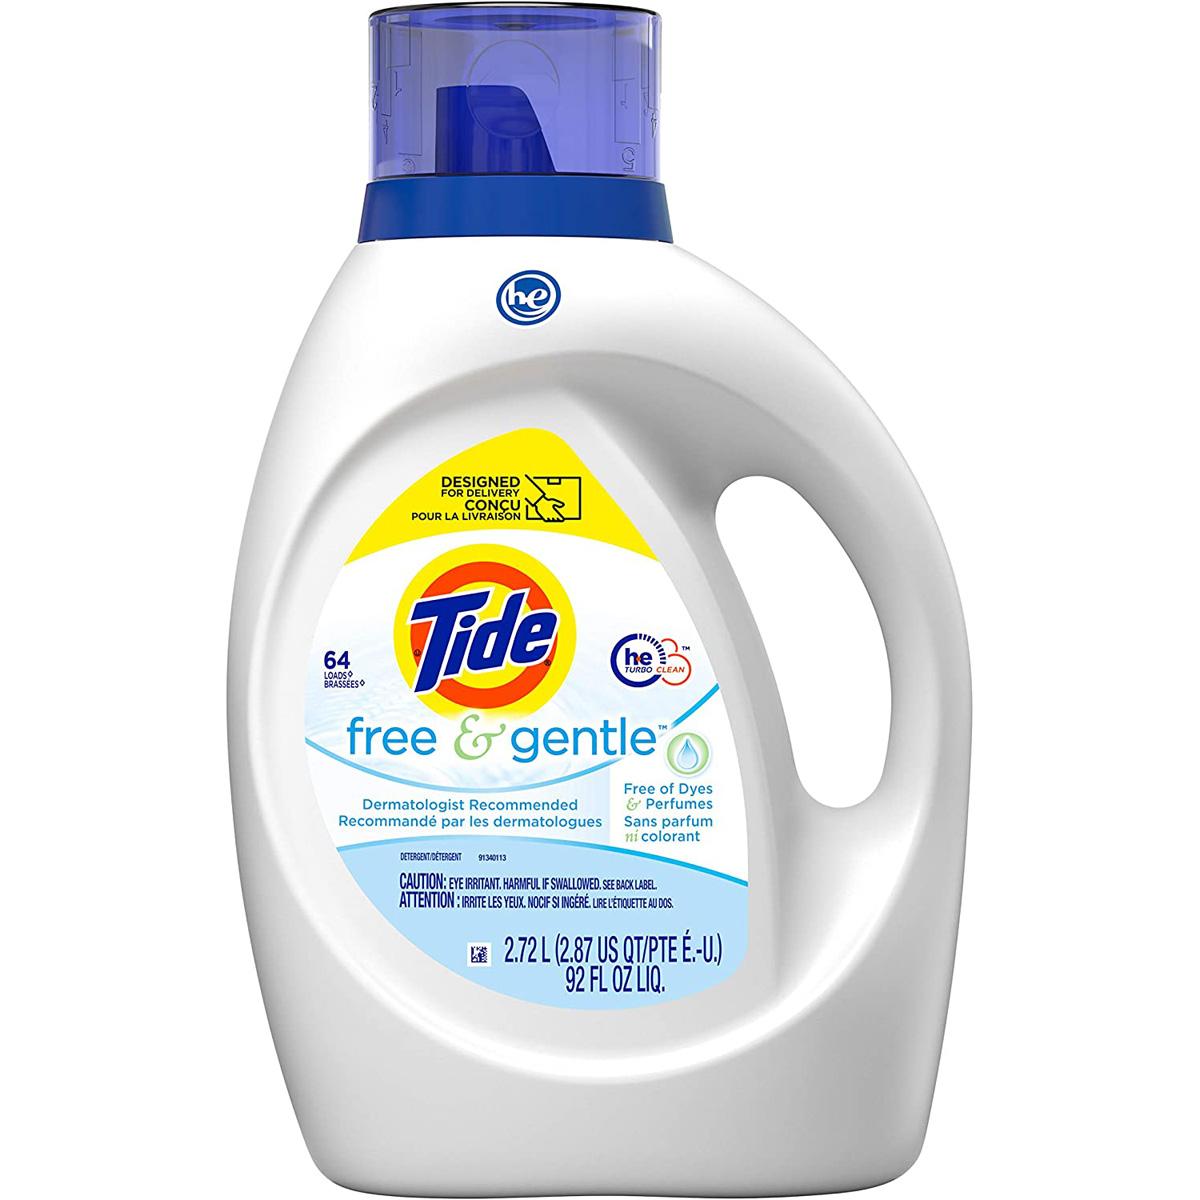 3 Tide HE Liquid Laundry Detergent for $25.91 Shipped